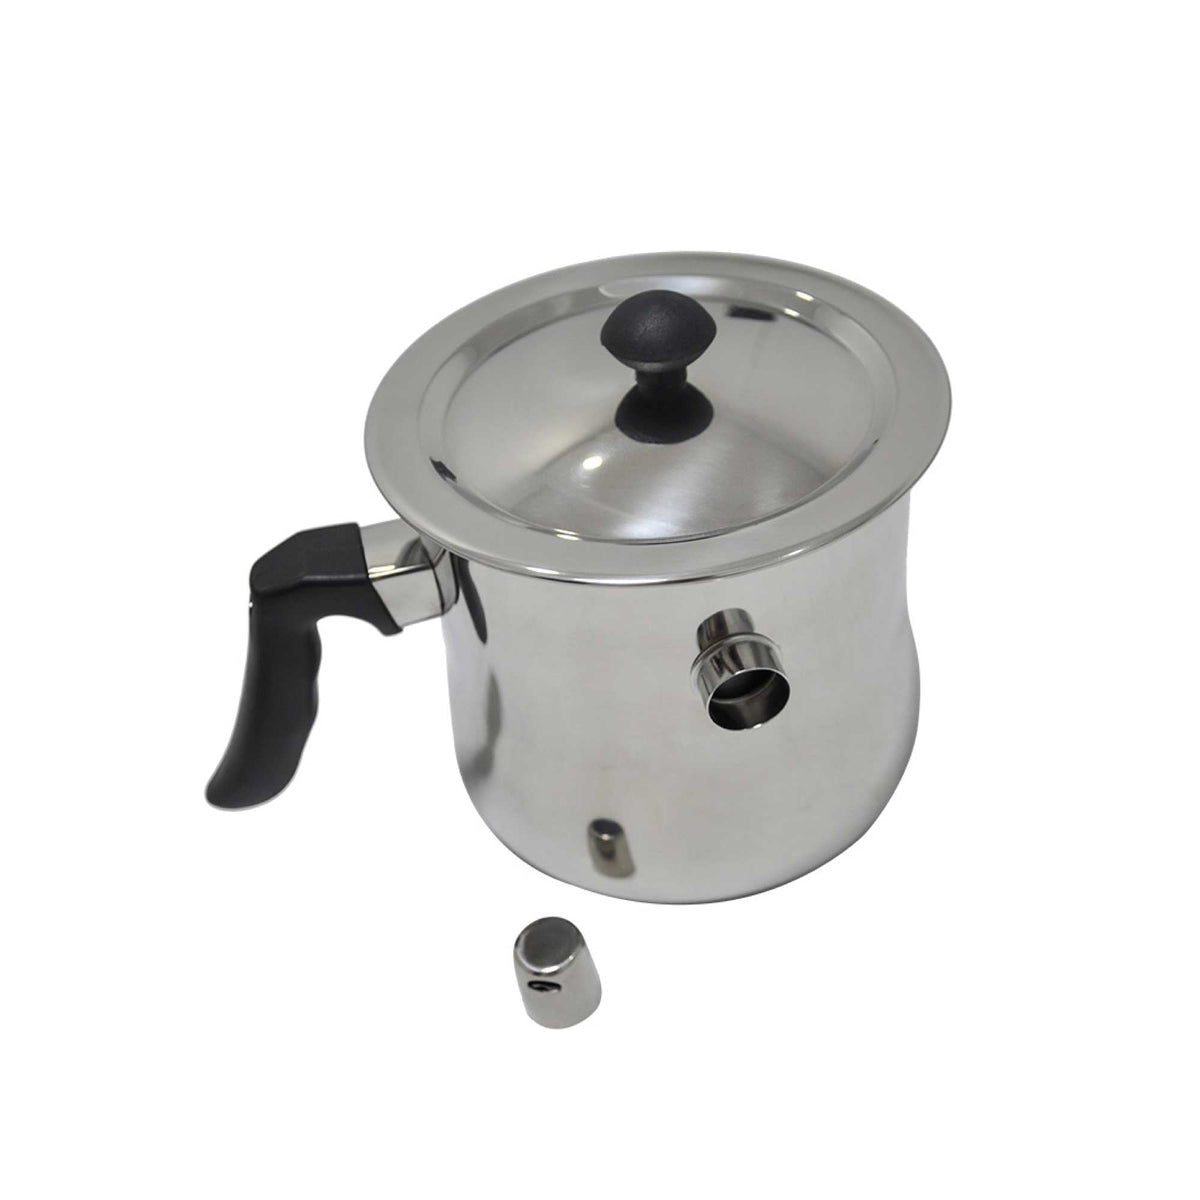 Bee Wax Melter Pot 1.4L Stainless Steel Double Boiler - Candle Making Beekeeping